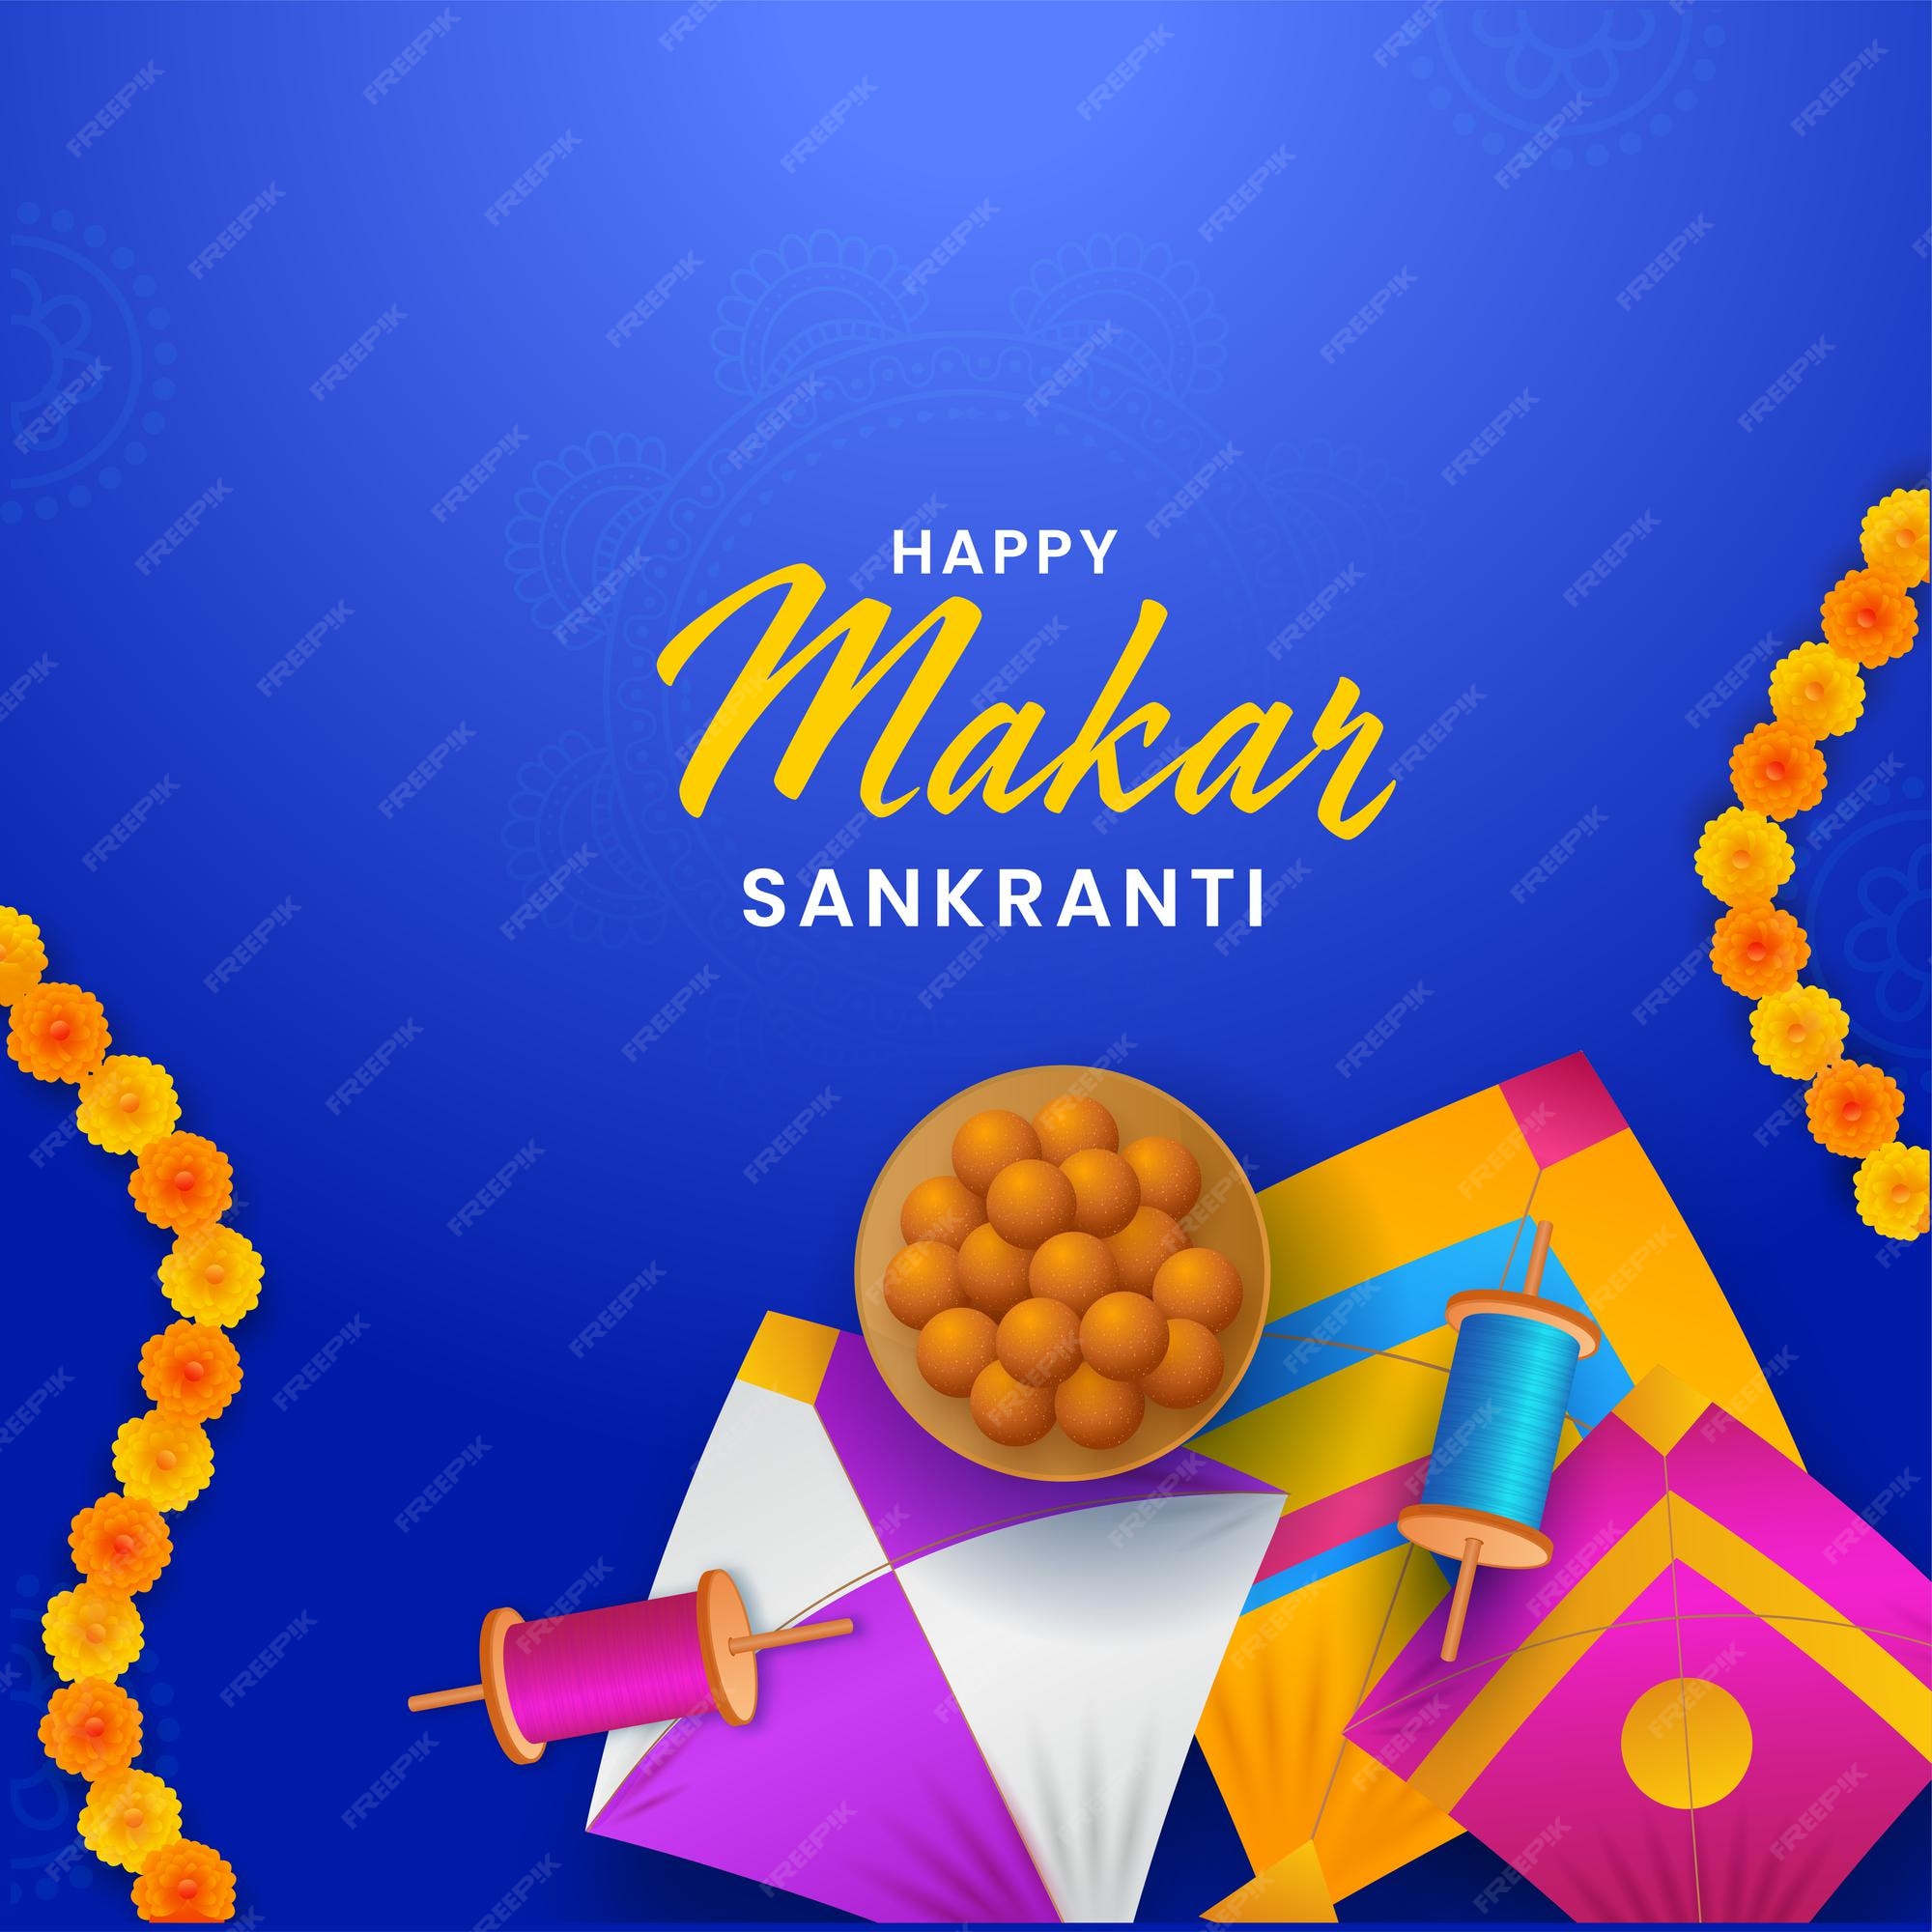 Premium Vector | Happy makar sankranti poster design with top view of  indian sweet (laddu) plate, kites, string spools and flower garland on blue  background.